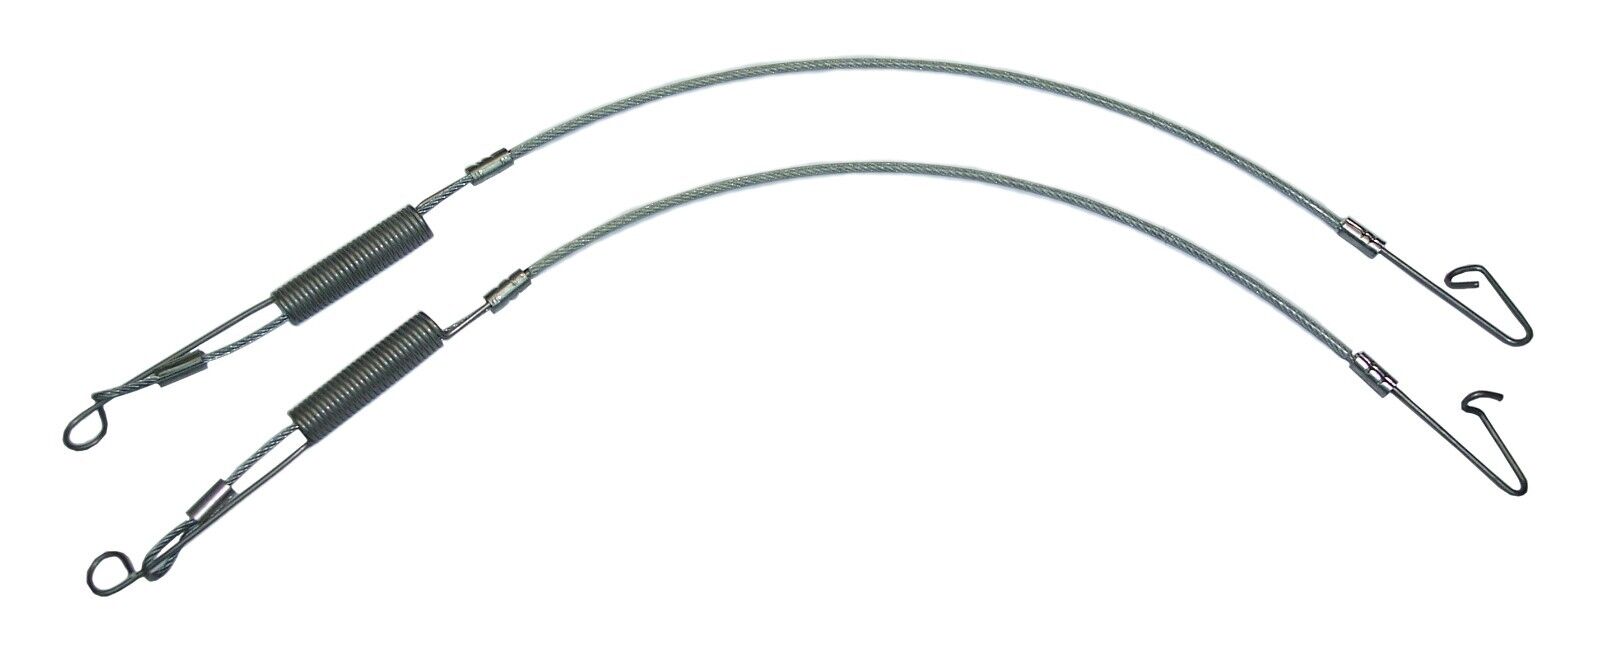 1994-2004 Ford Mustang GT & Cobra convertible top rear flap tension cables, pair